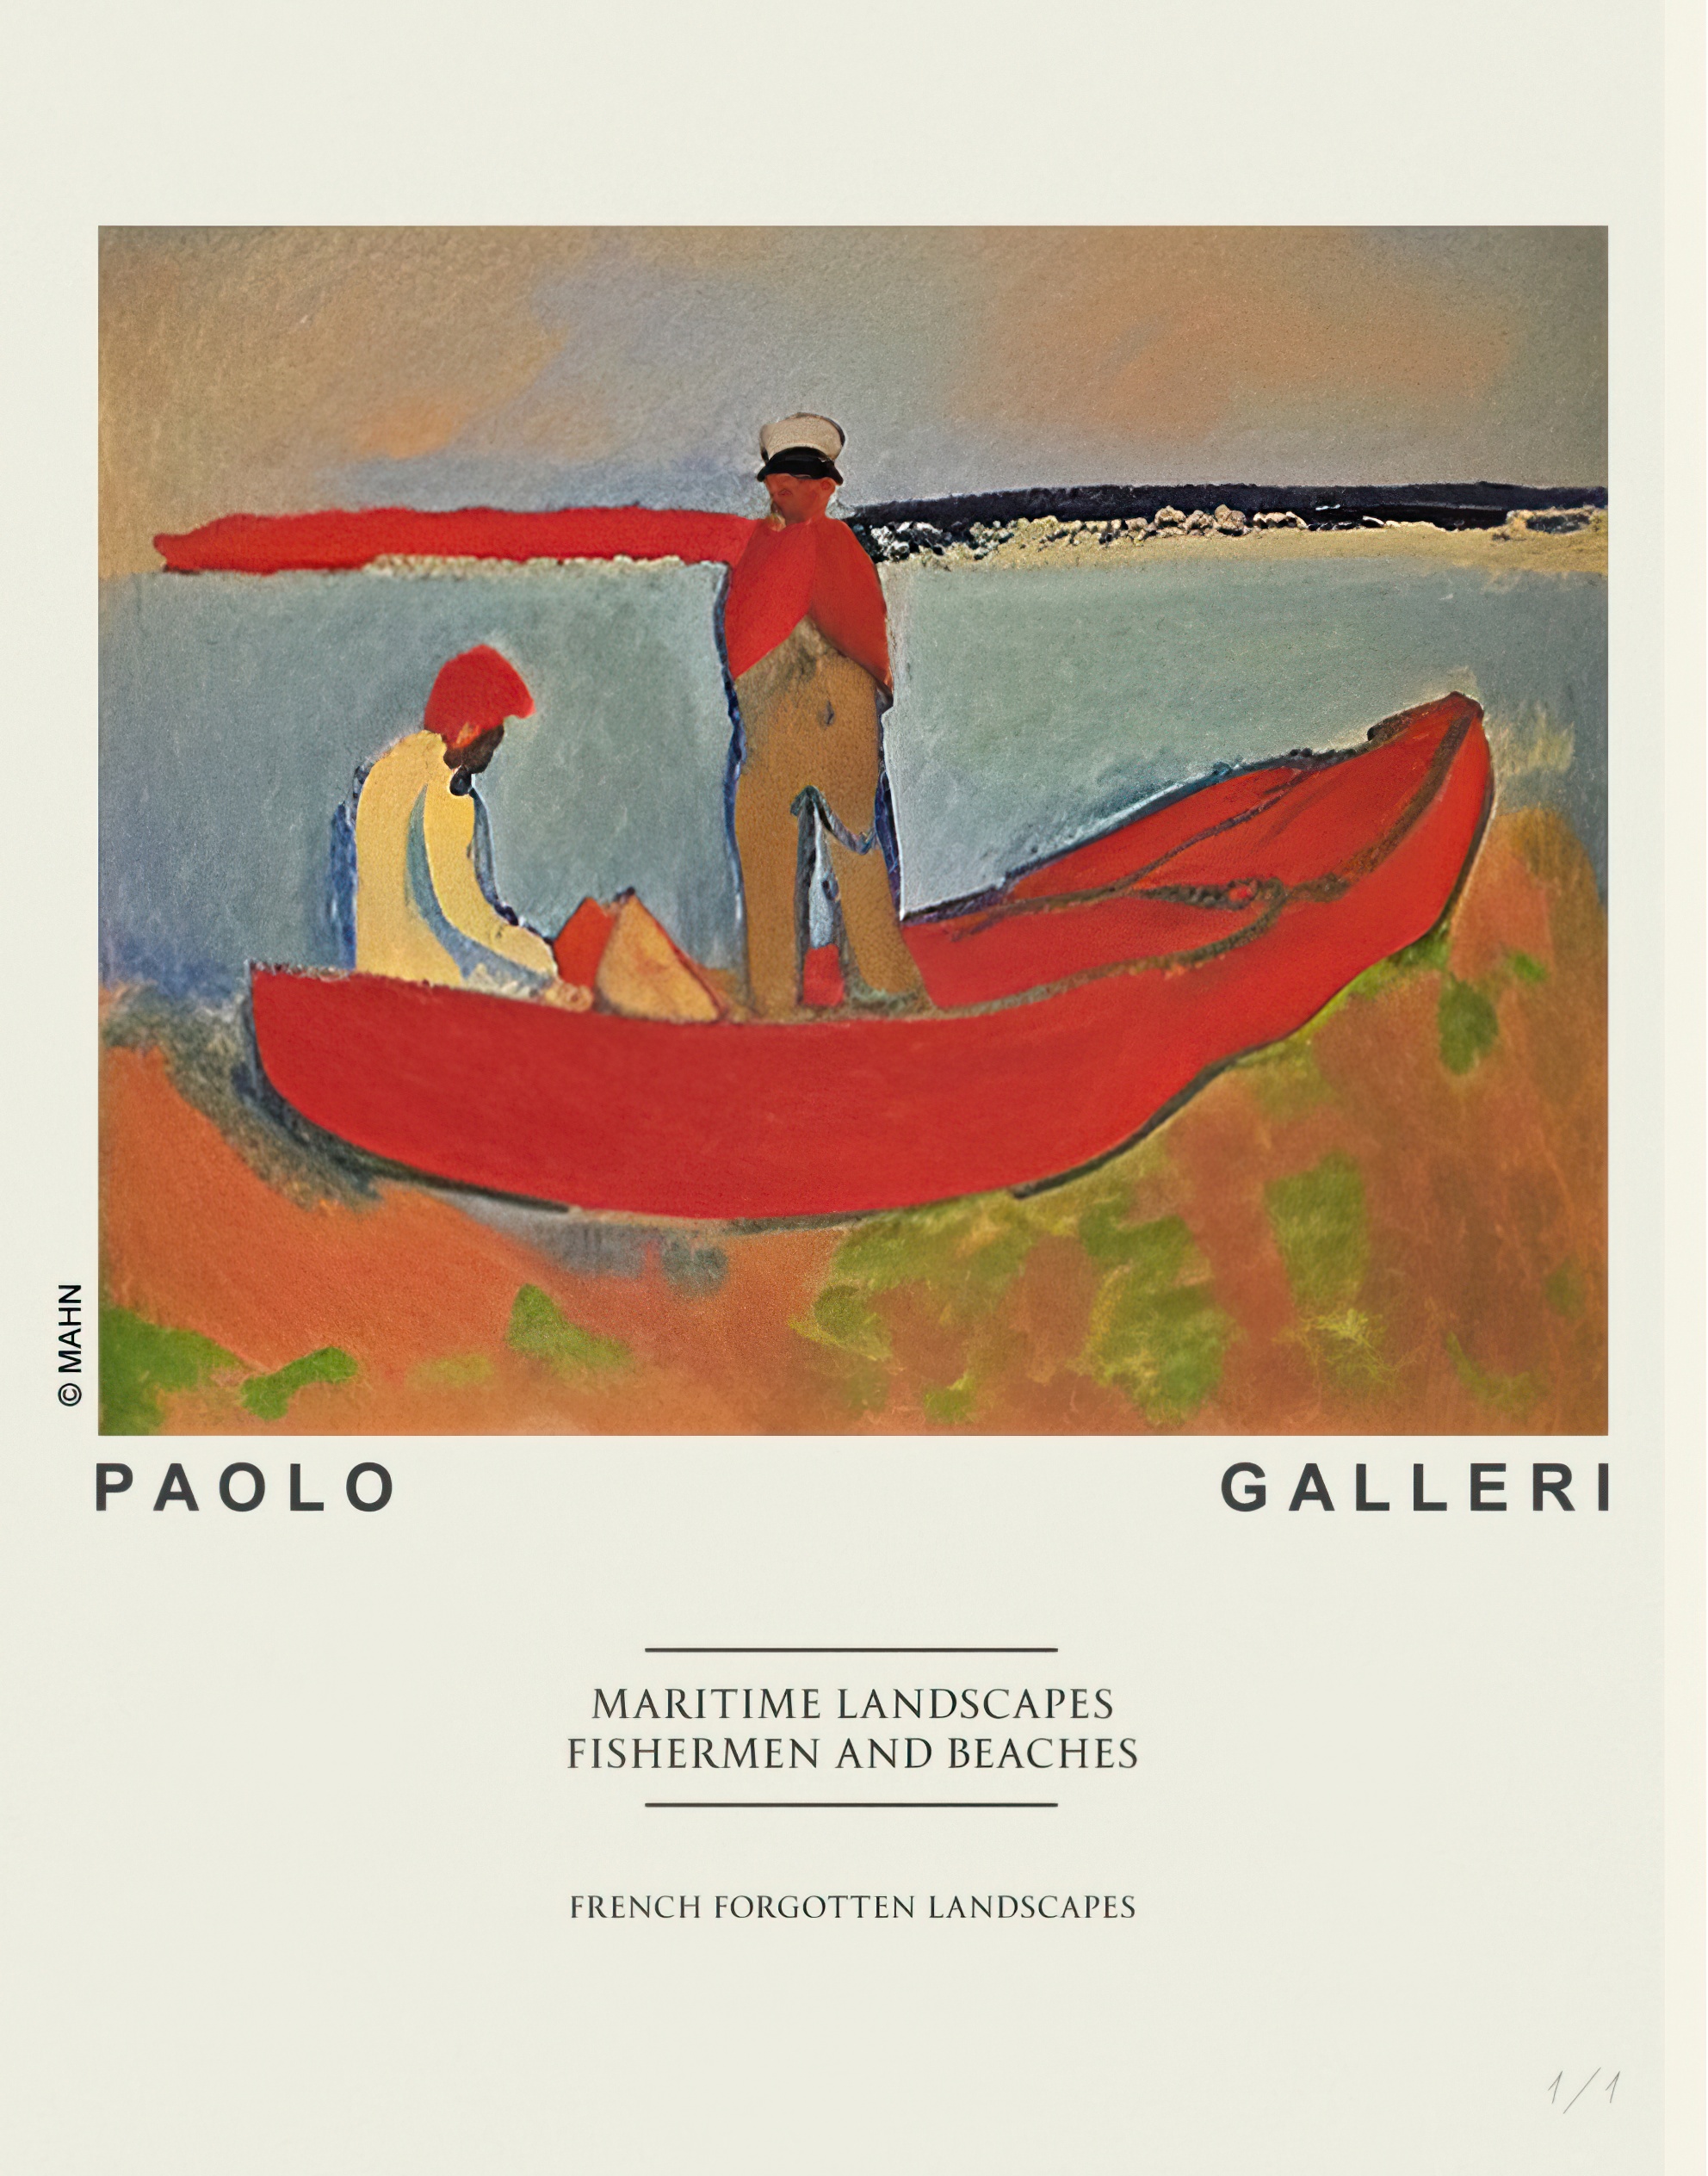 'The Red Boat' |Paolo Galleri|